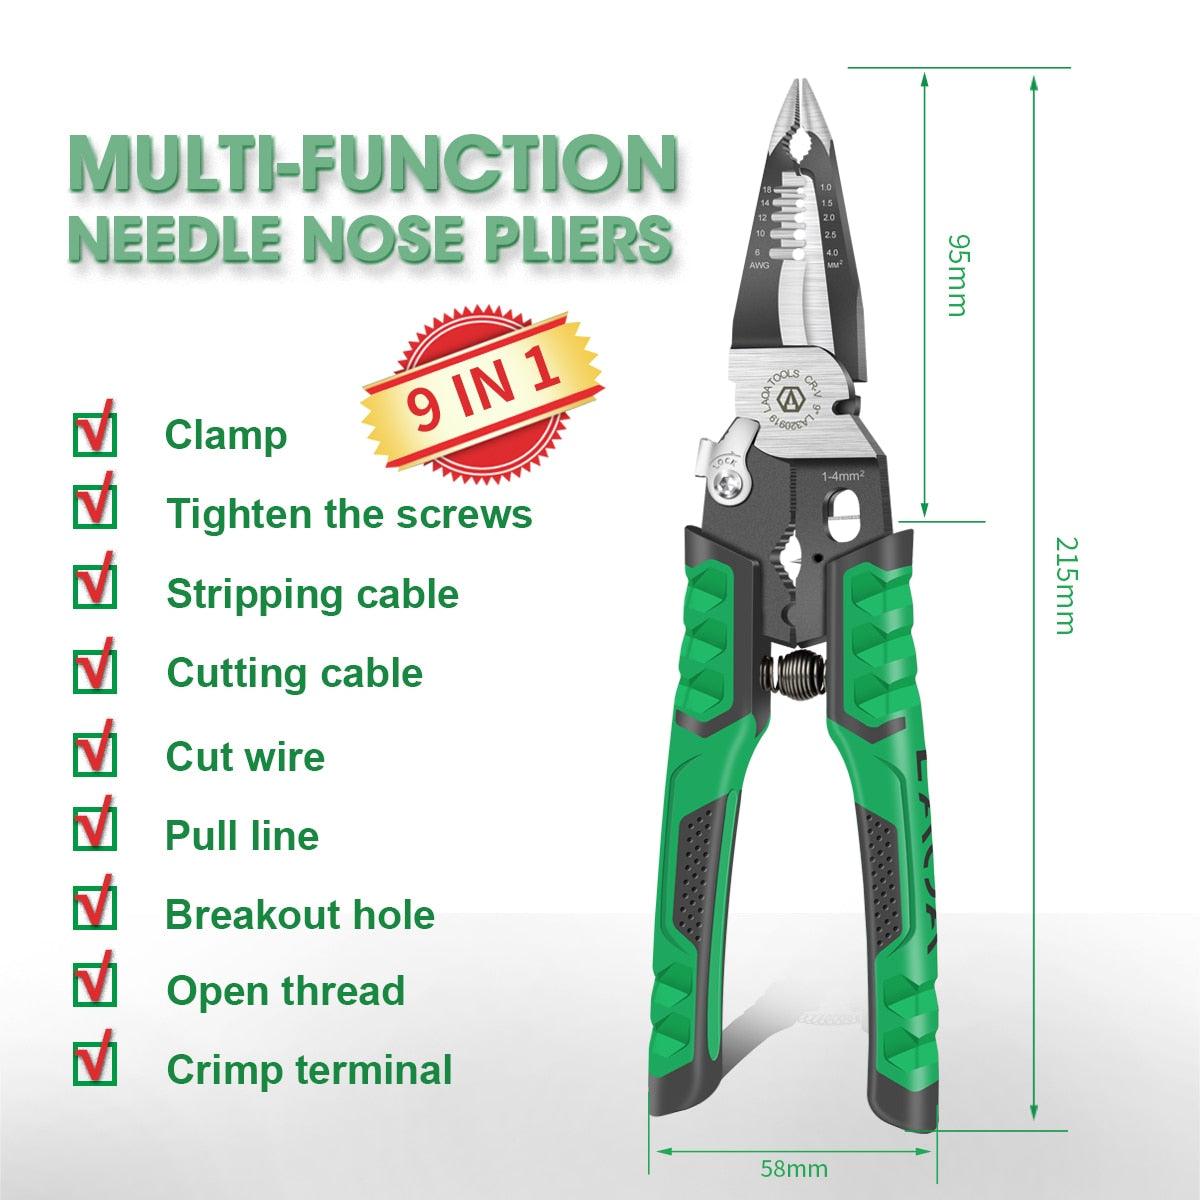 LAOA Multifunctional Electrician Pliers Long Nose Pliers Wire Stripper Cable Cutter Terminal Crimping Hand Tools - YOURISHOP.COM